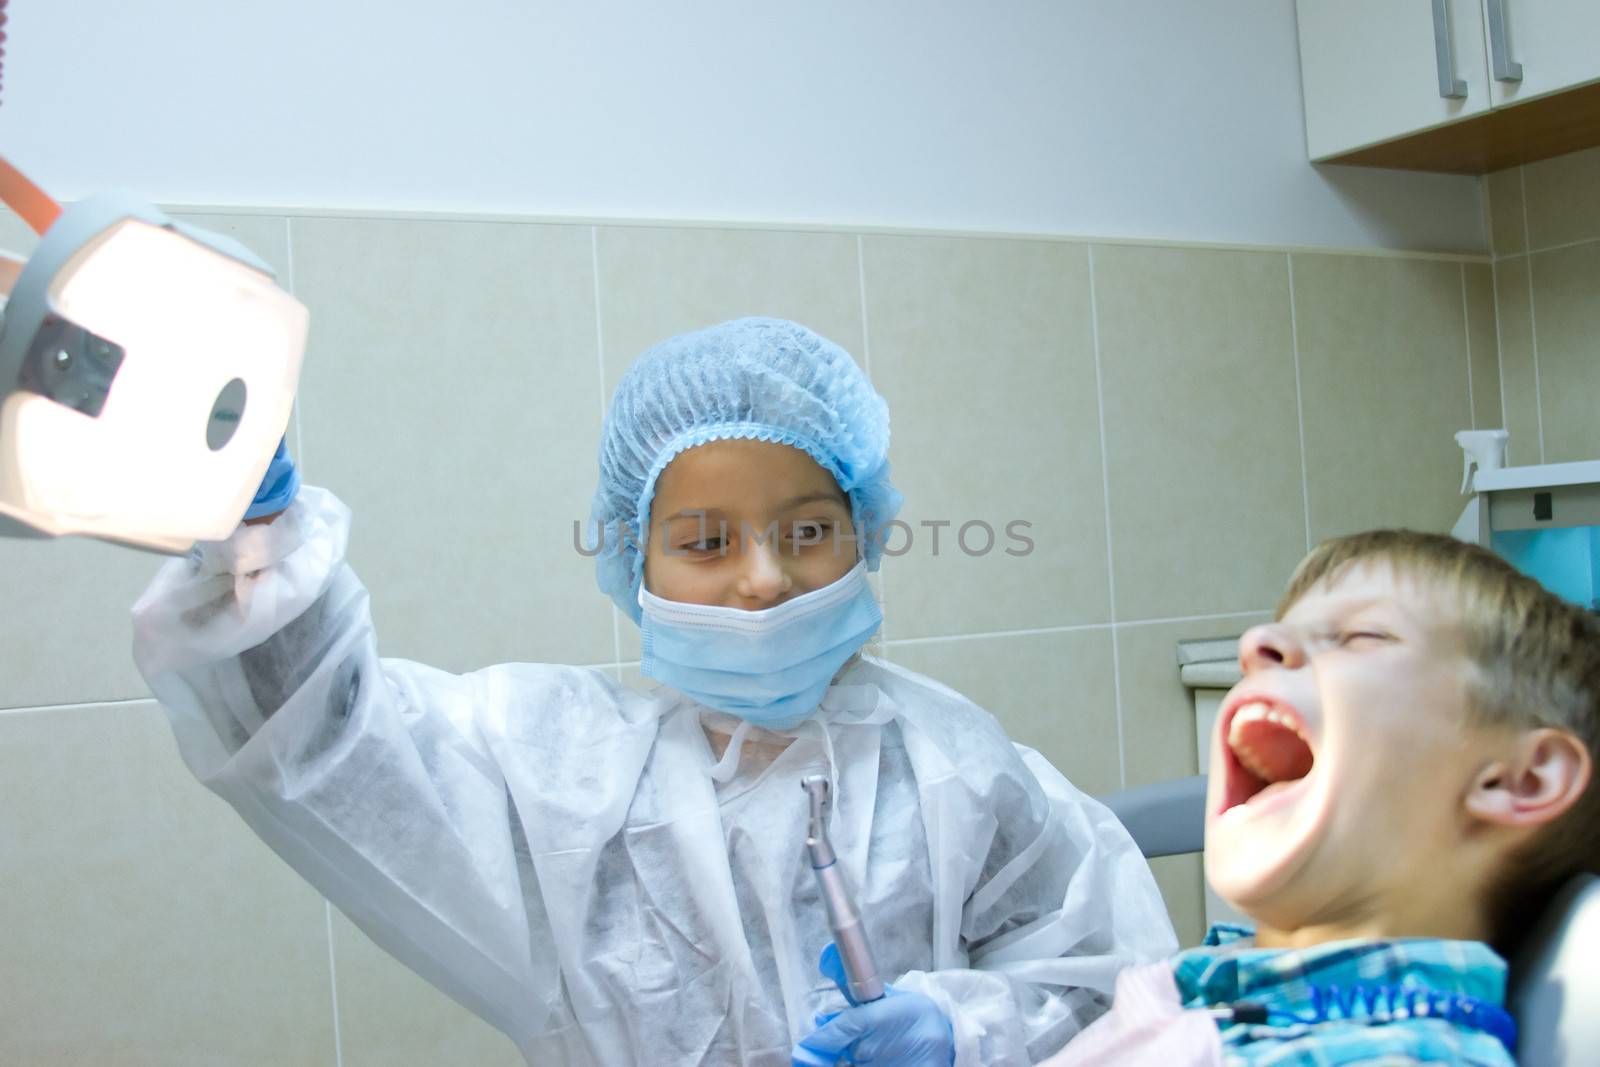 couple of kids playing doctor at the dentist by victosha